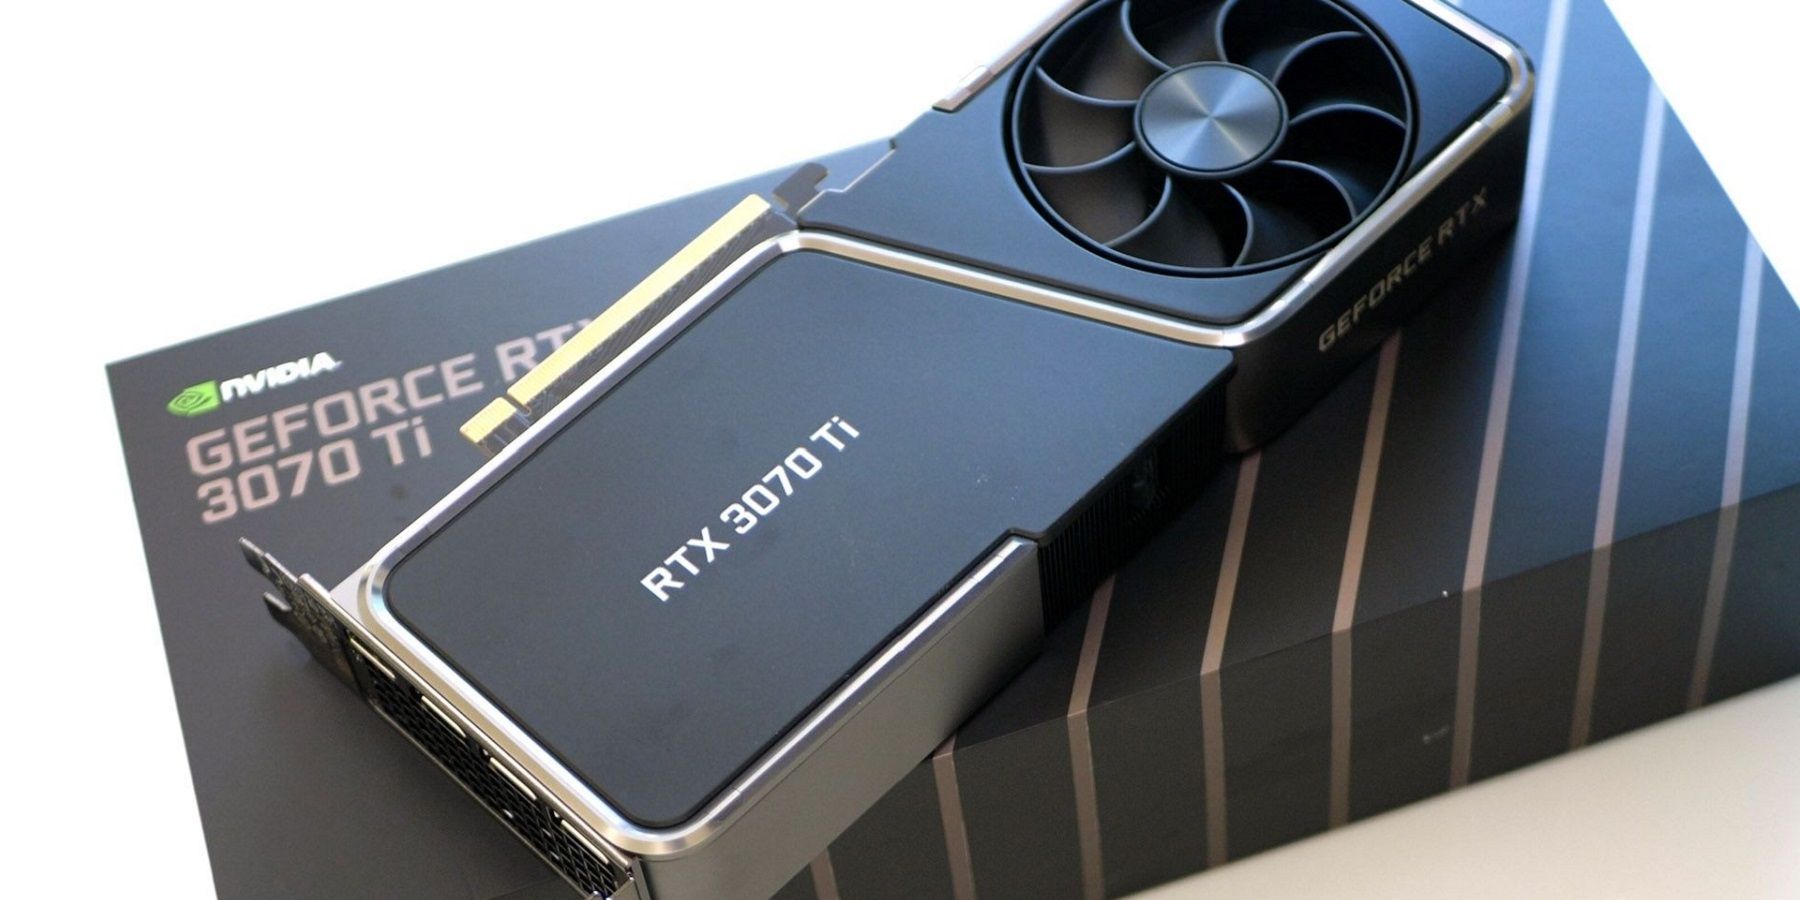 Photo of an Nvidia RTX 3070 Ti graphics card on top of its display box.